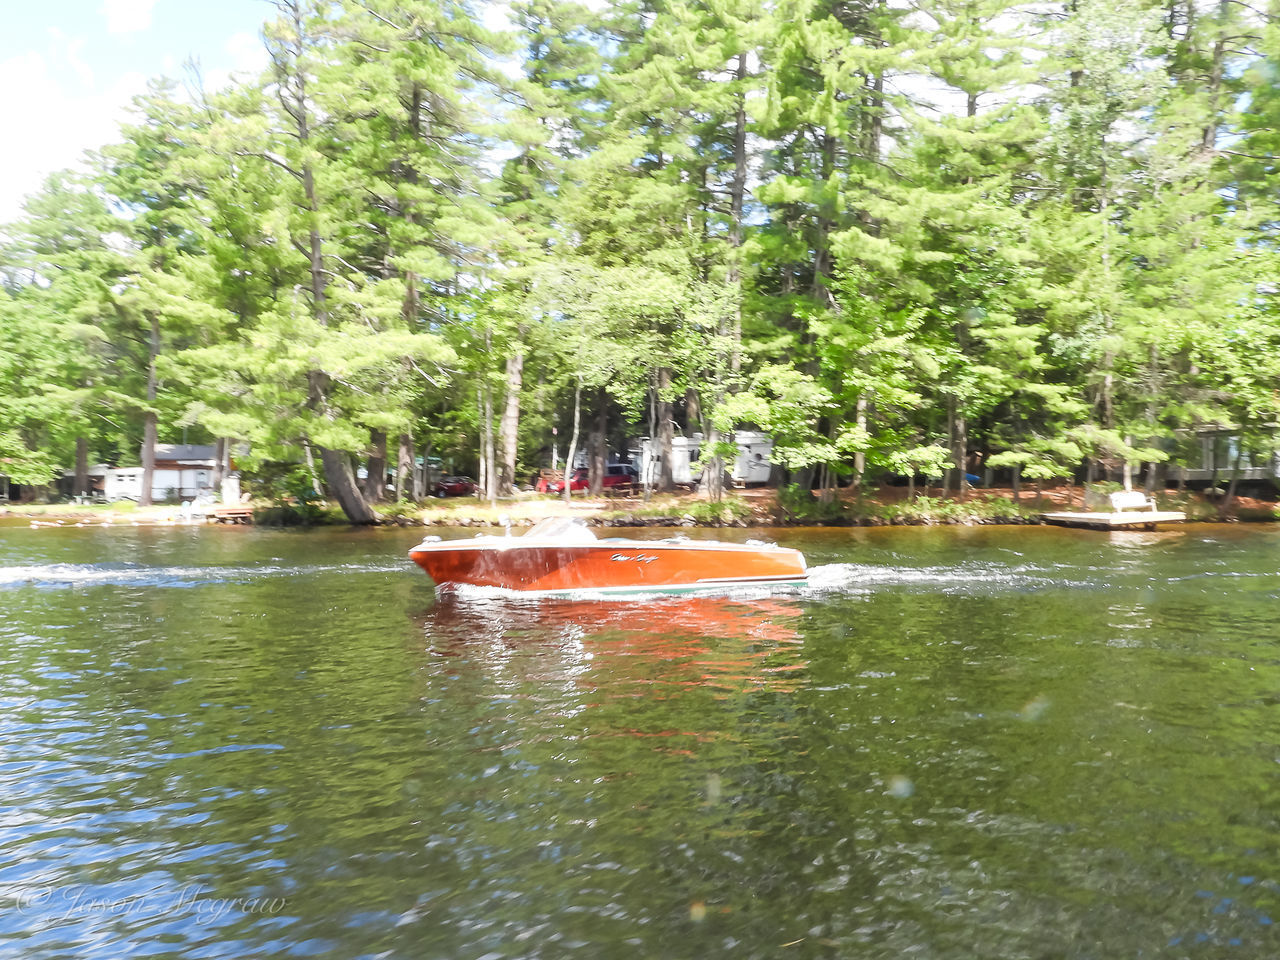 BOAT IN LAKE AGAINST TREES IN FOREST